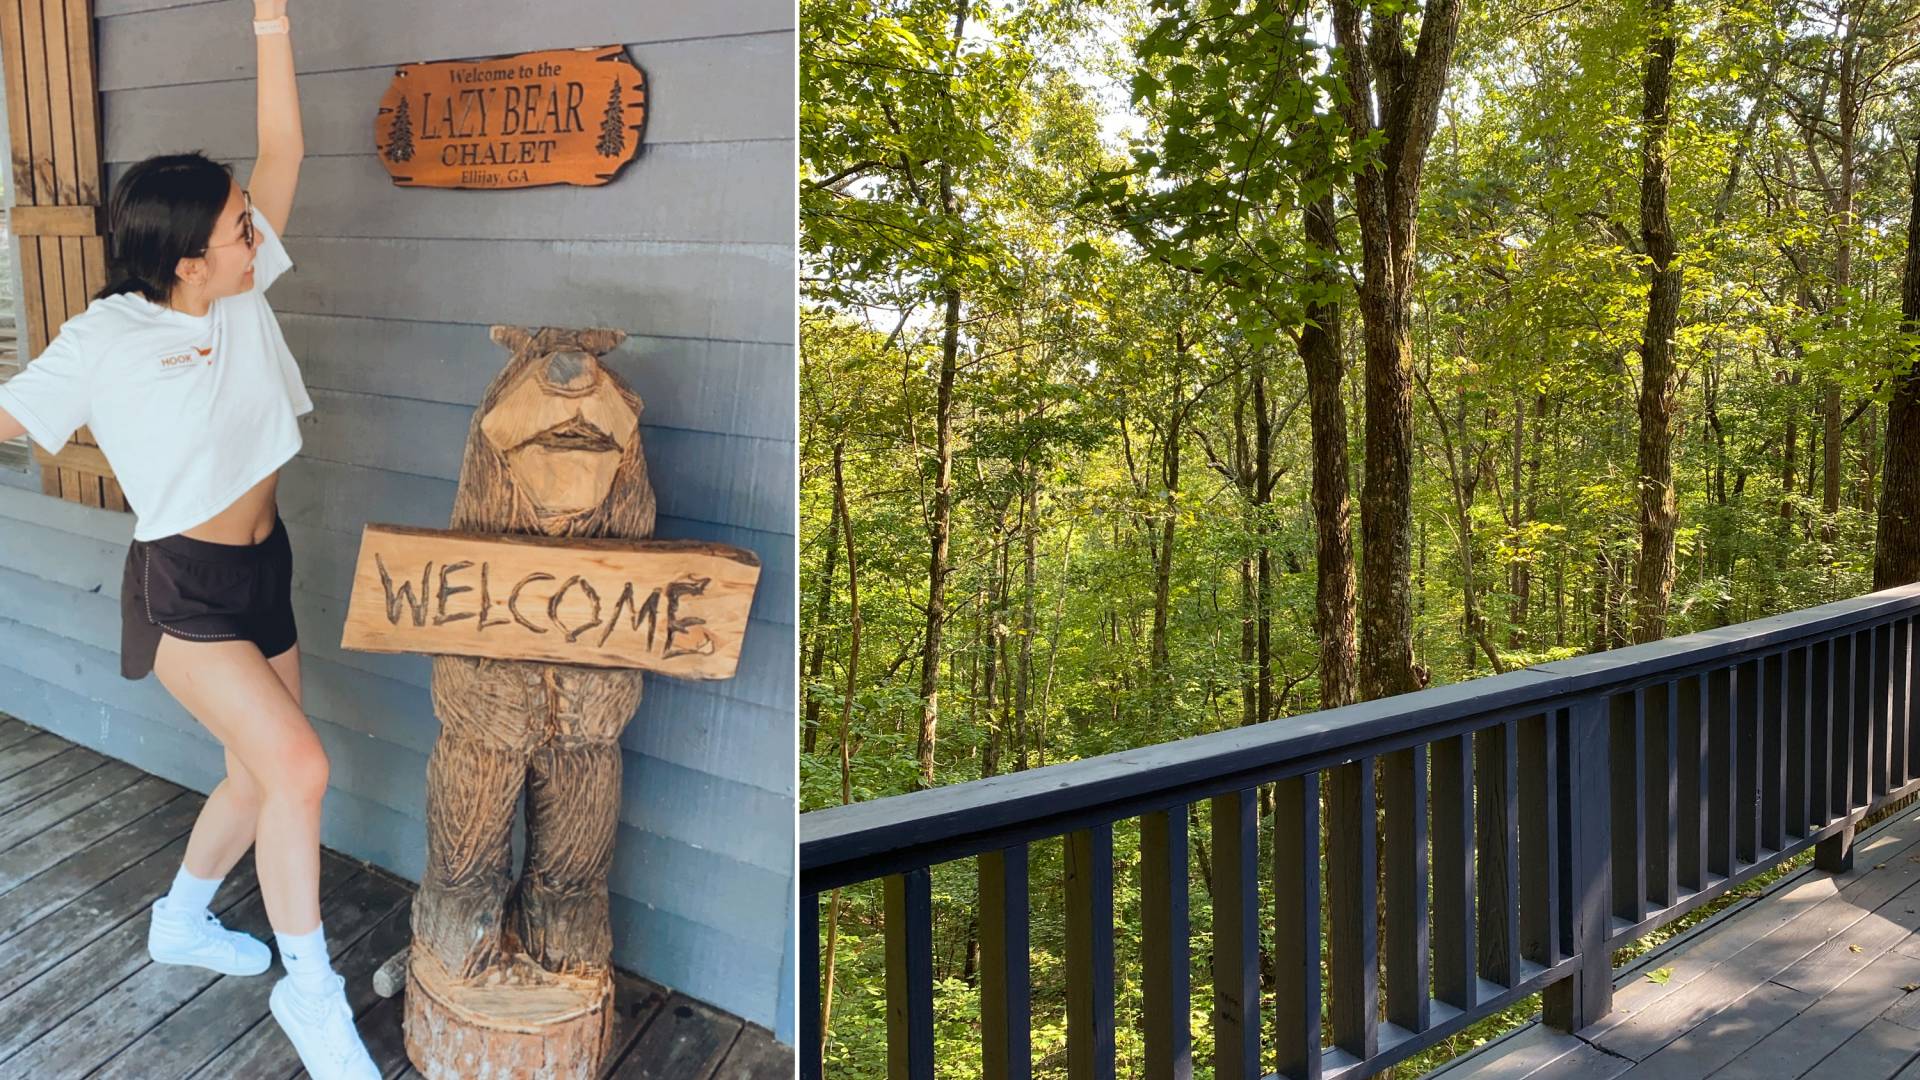 Lucy presents the cabin signs, "Welcome" held by a carving of a bear and "Welcome to the Lazy Bear Chalet, Ellijay, GA" and the tree-filled view from the back